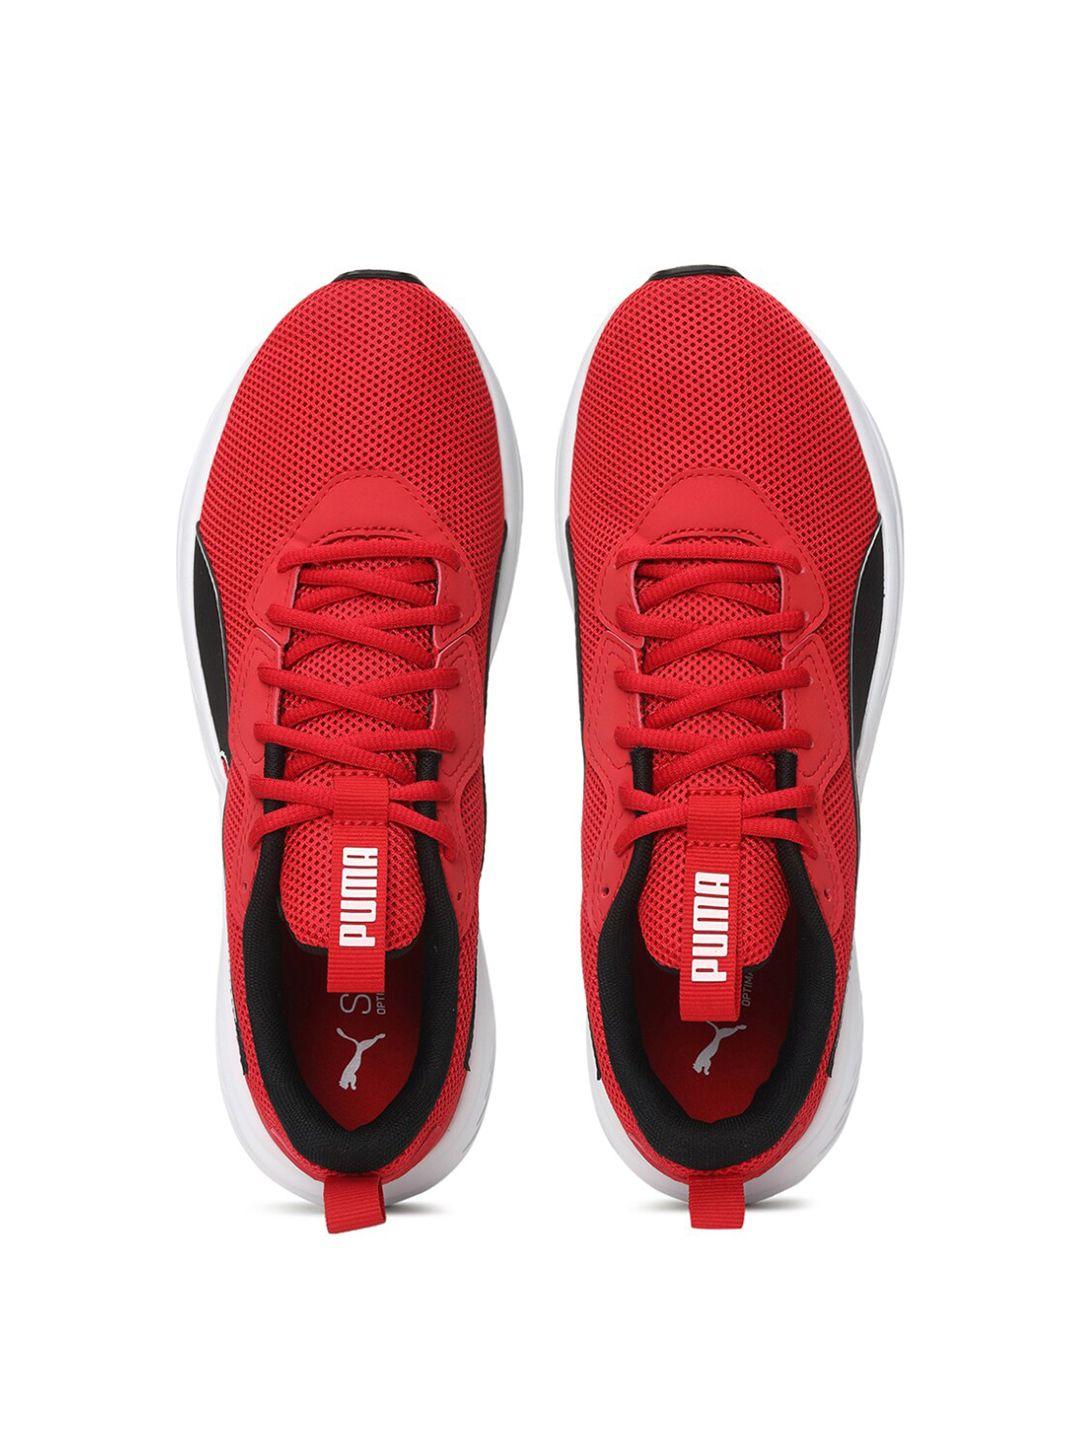 Puma Unisex Red Textile Running Shoes